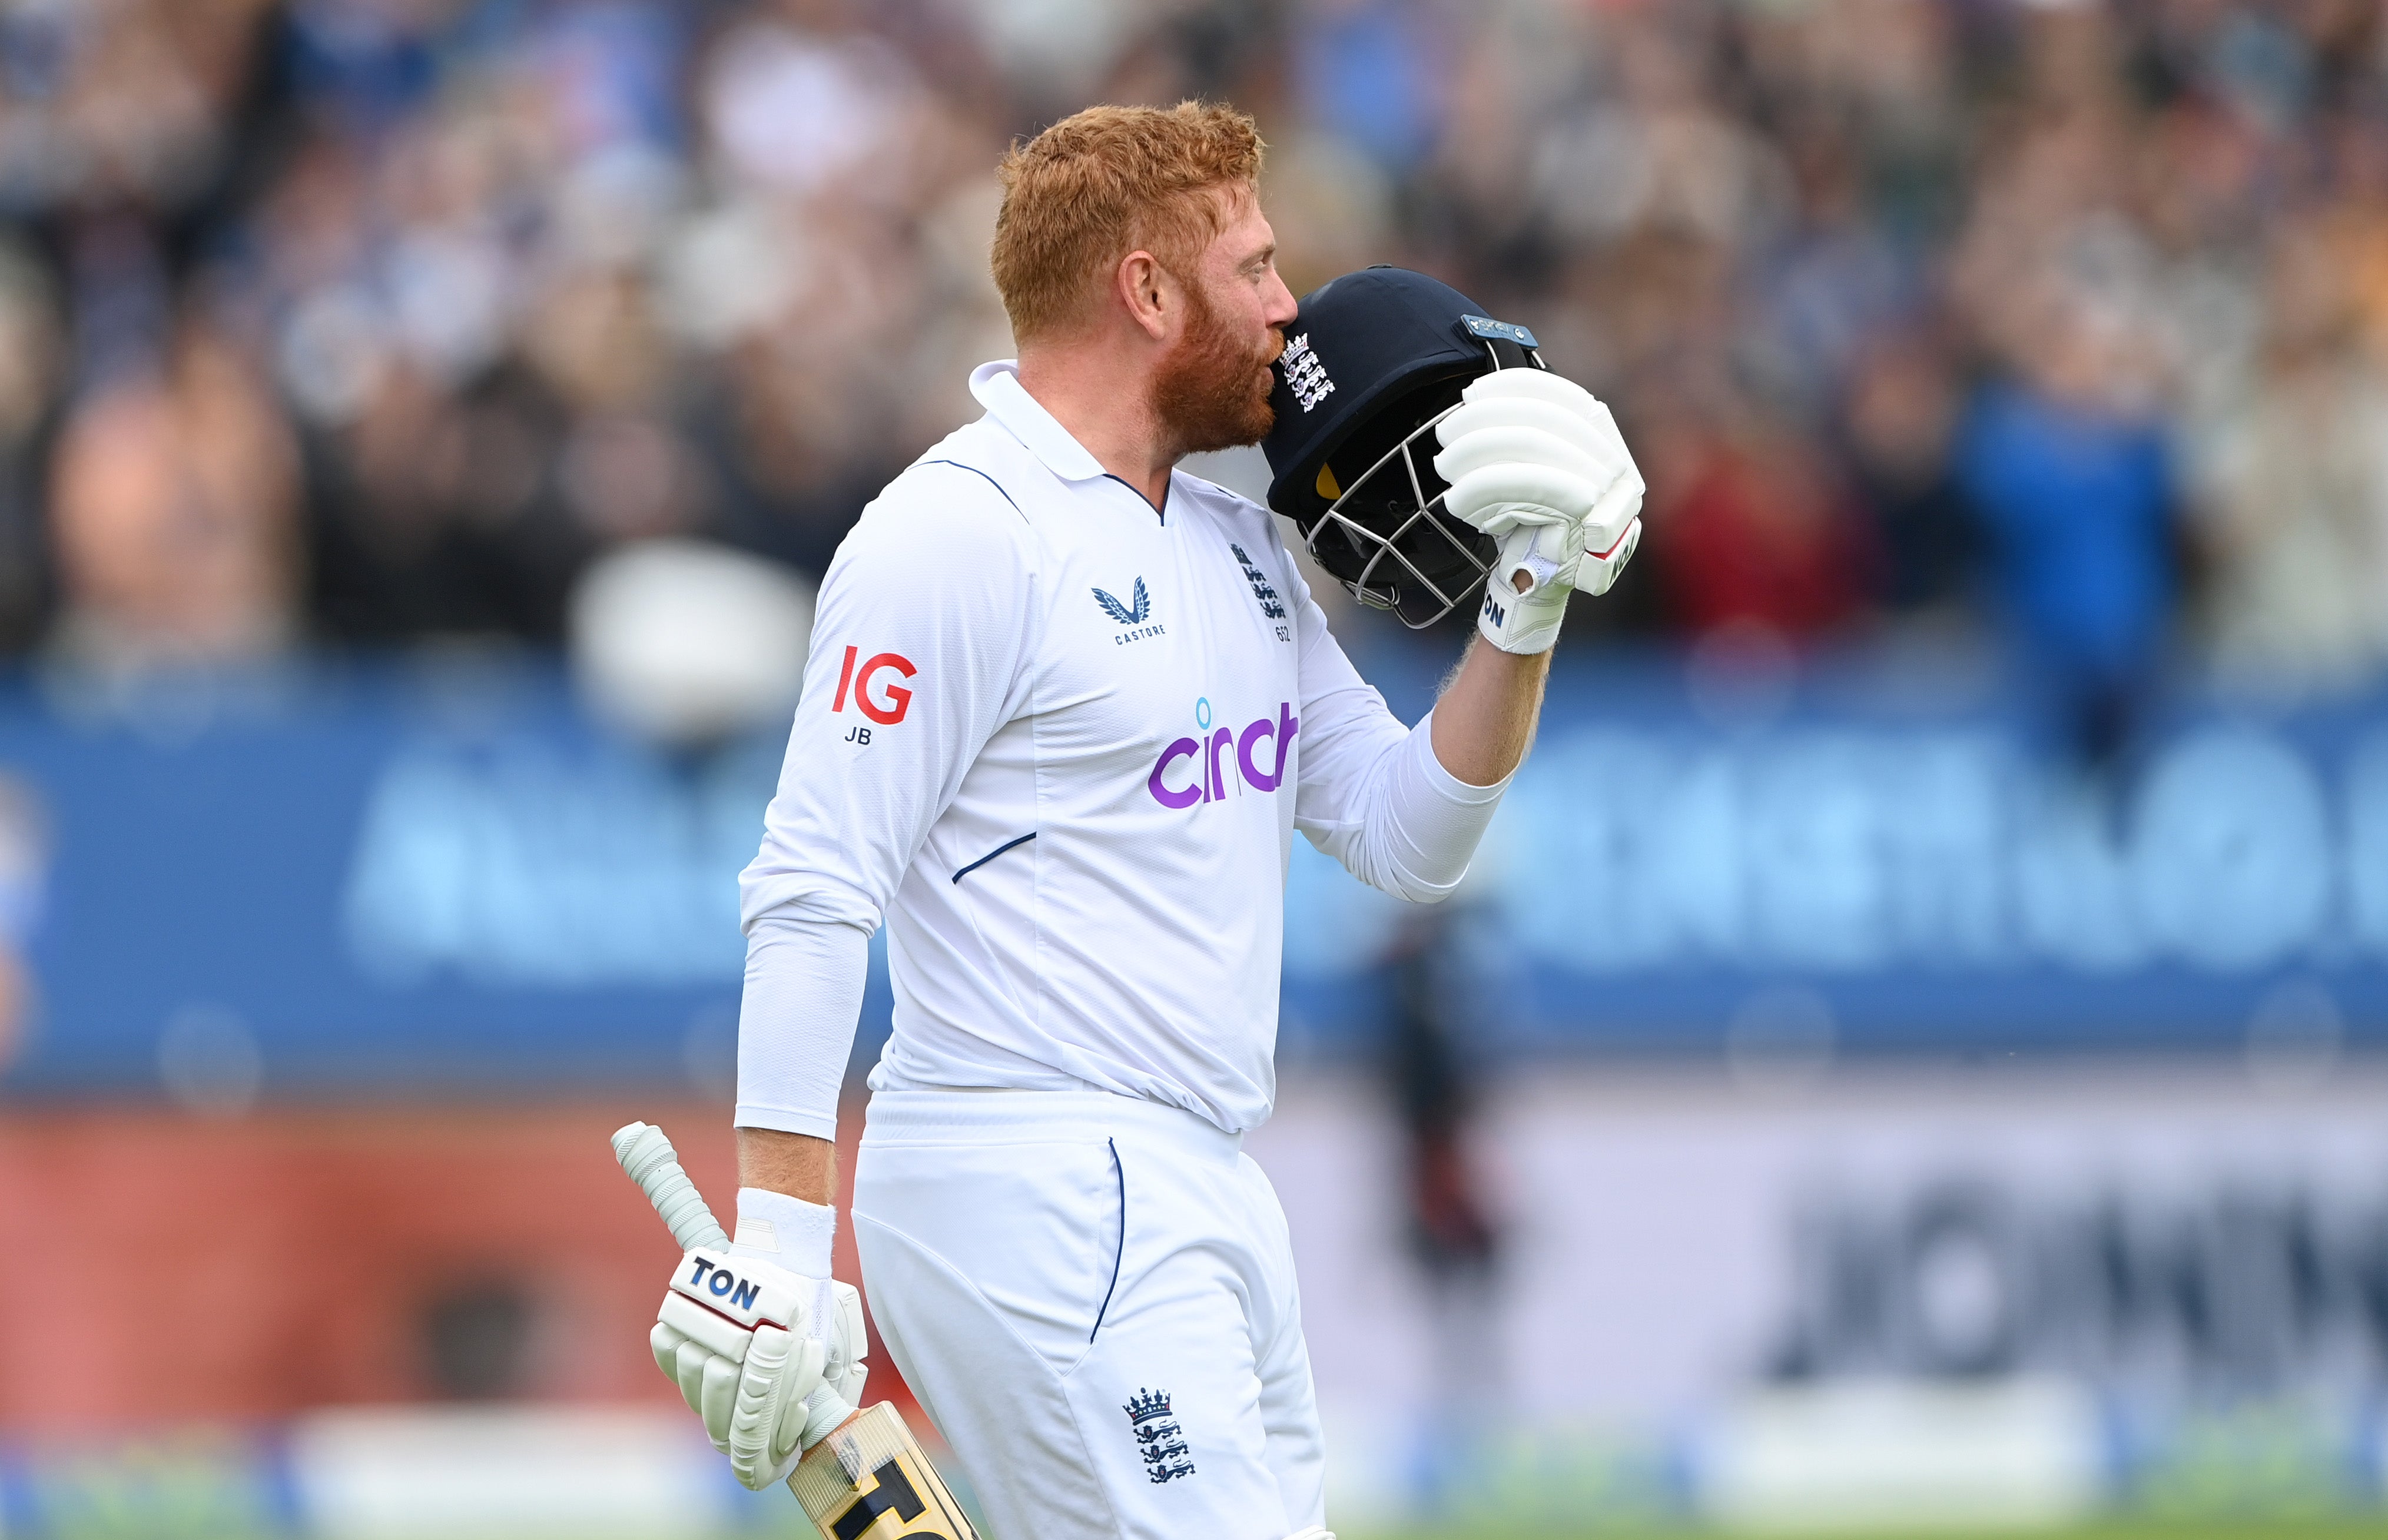 Jonny Bairstow has scored 12 centuries in his 99 Test matches